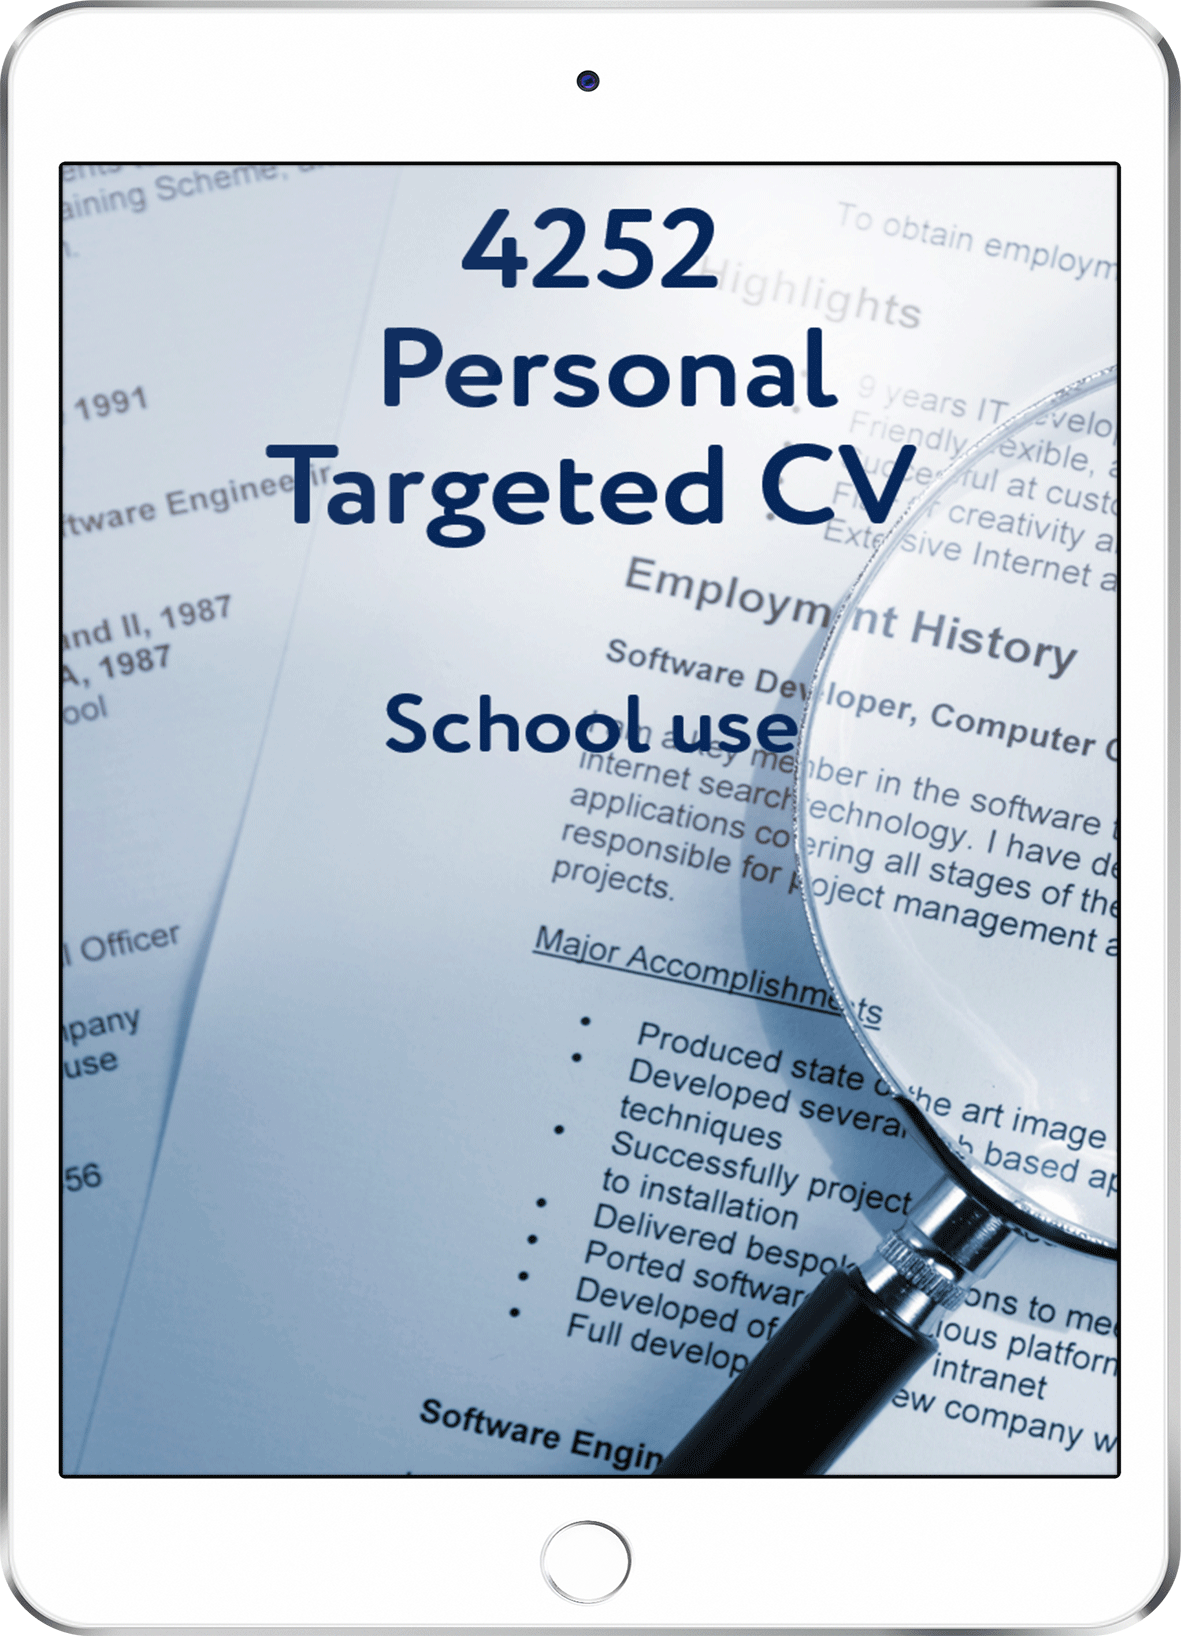 4252 v8 Personal Targeted CV - School Use